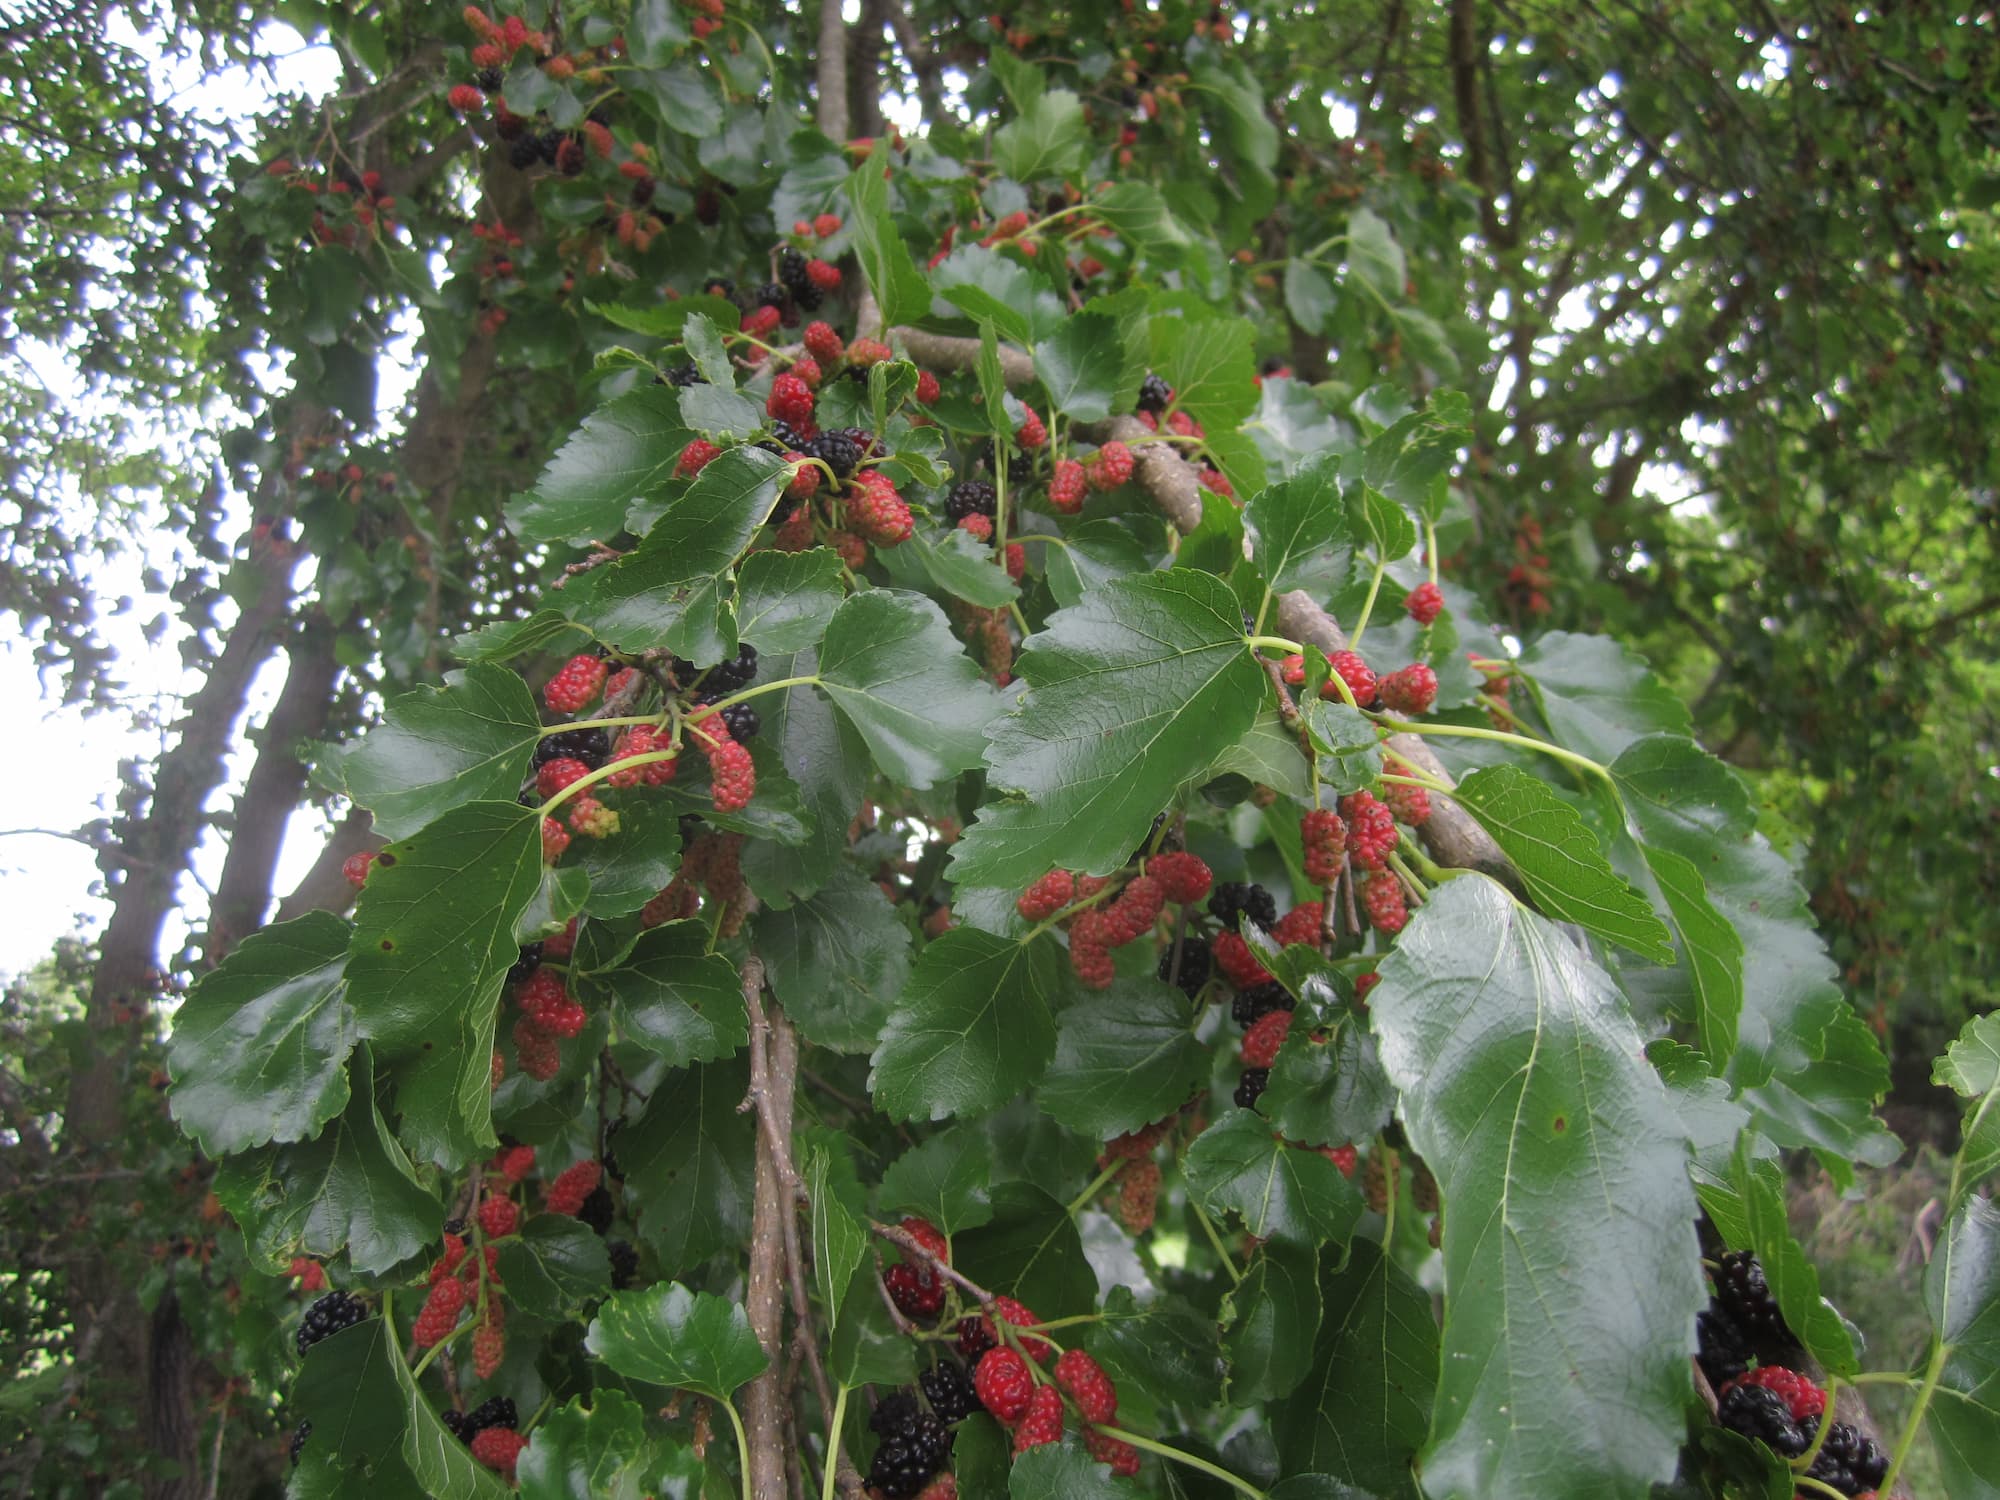 Early in the season, a mulberry tree will be packed full of multicolored berries.